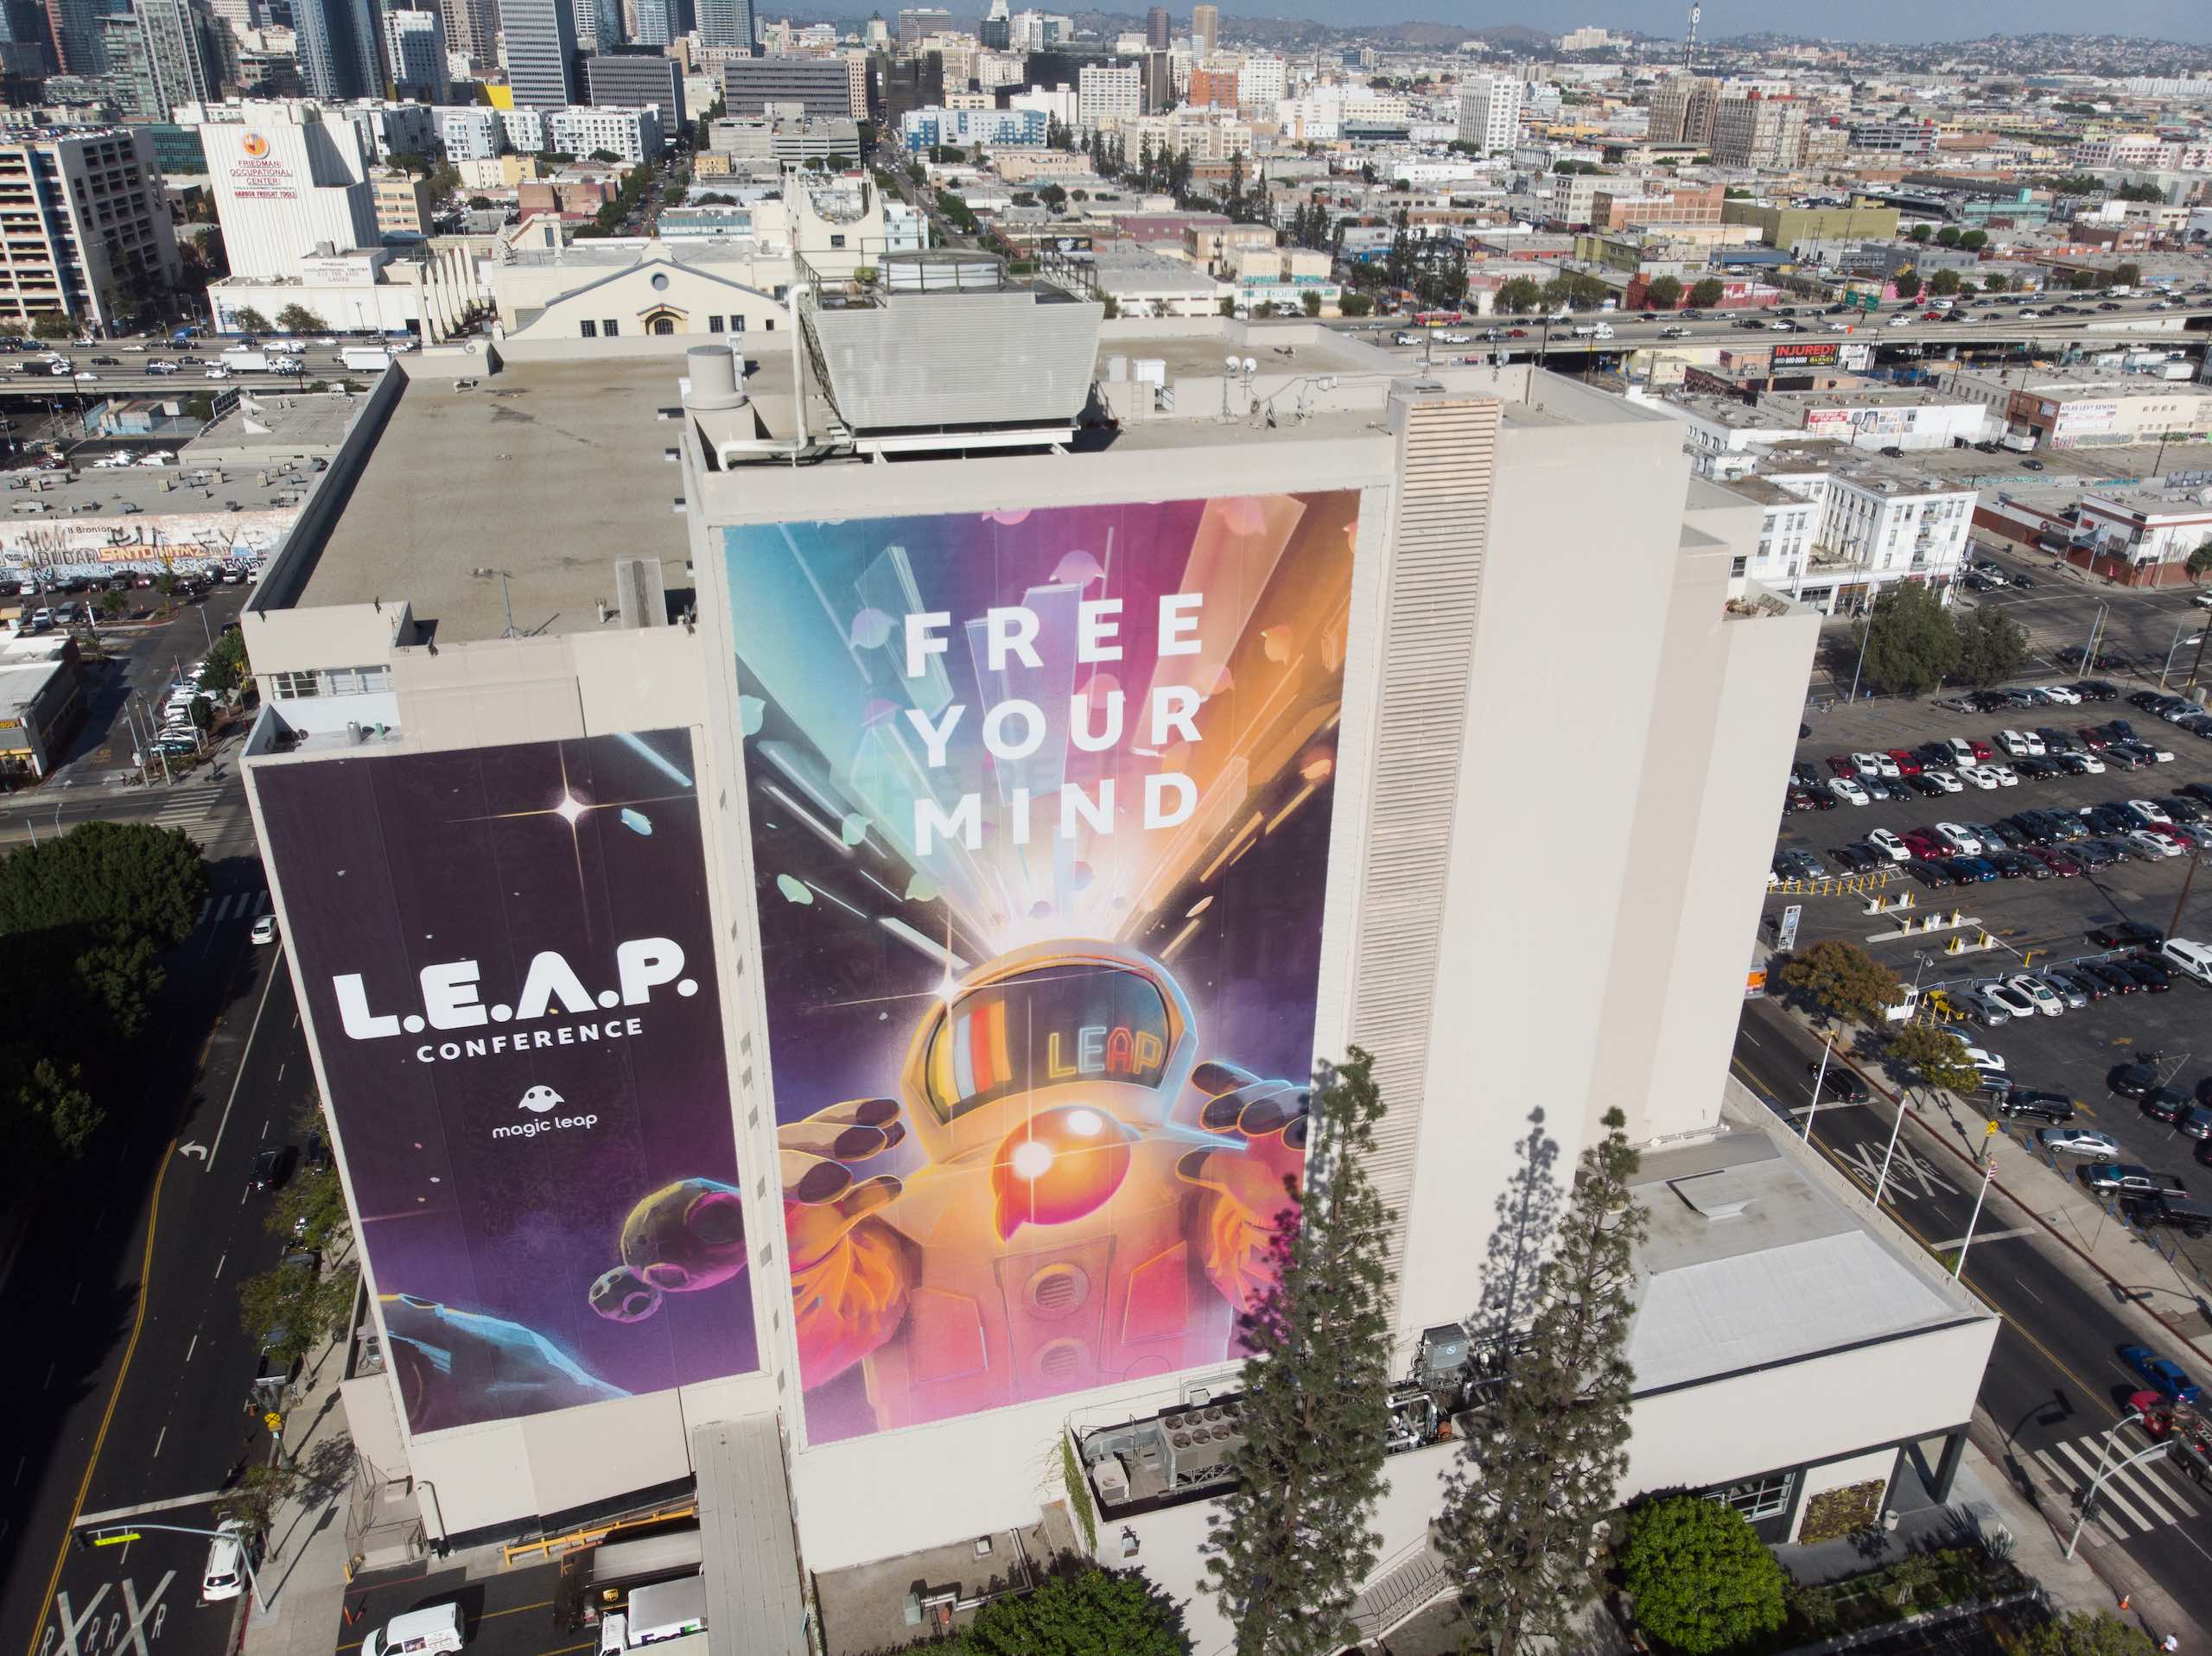 LEAP Conference Magic Leap and Free Your Mind banners on display on side of a building in city